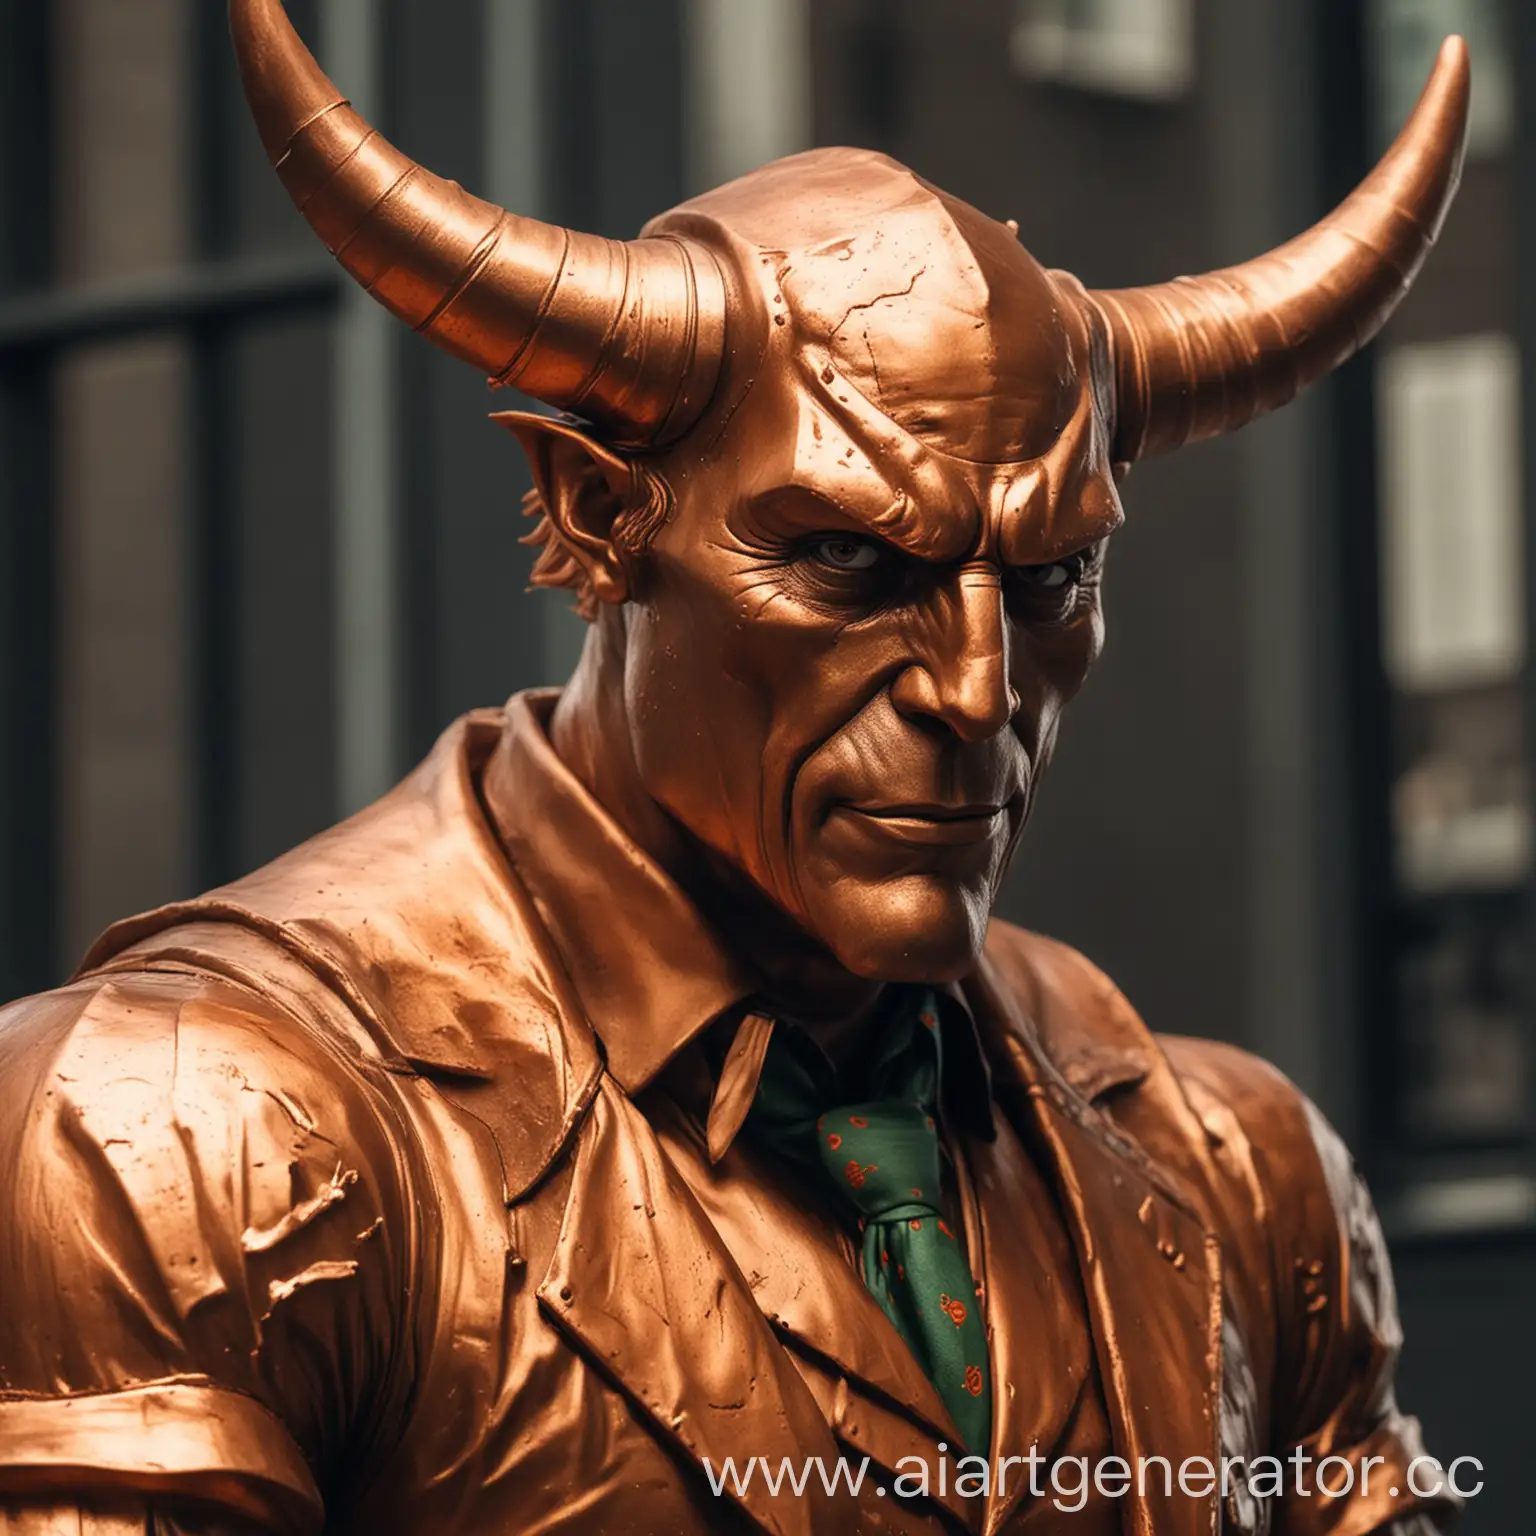 Contemplative-Copper-Bull-with-Joker-Thoughts